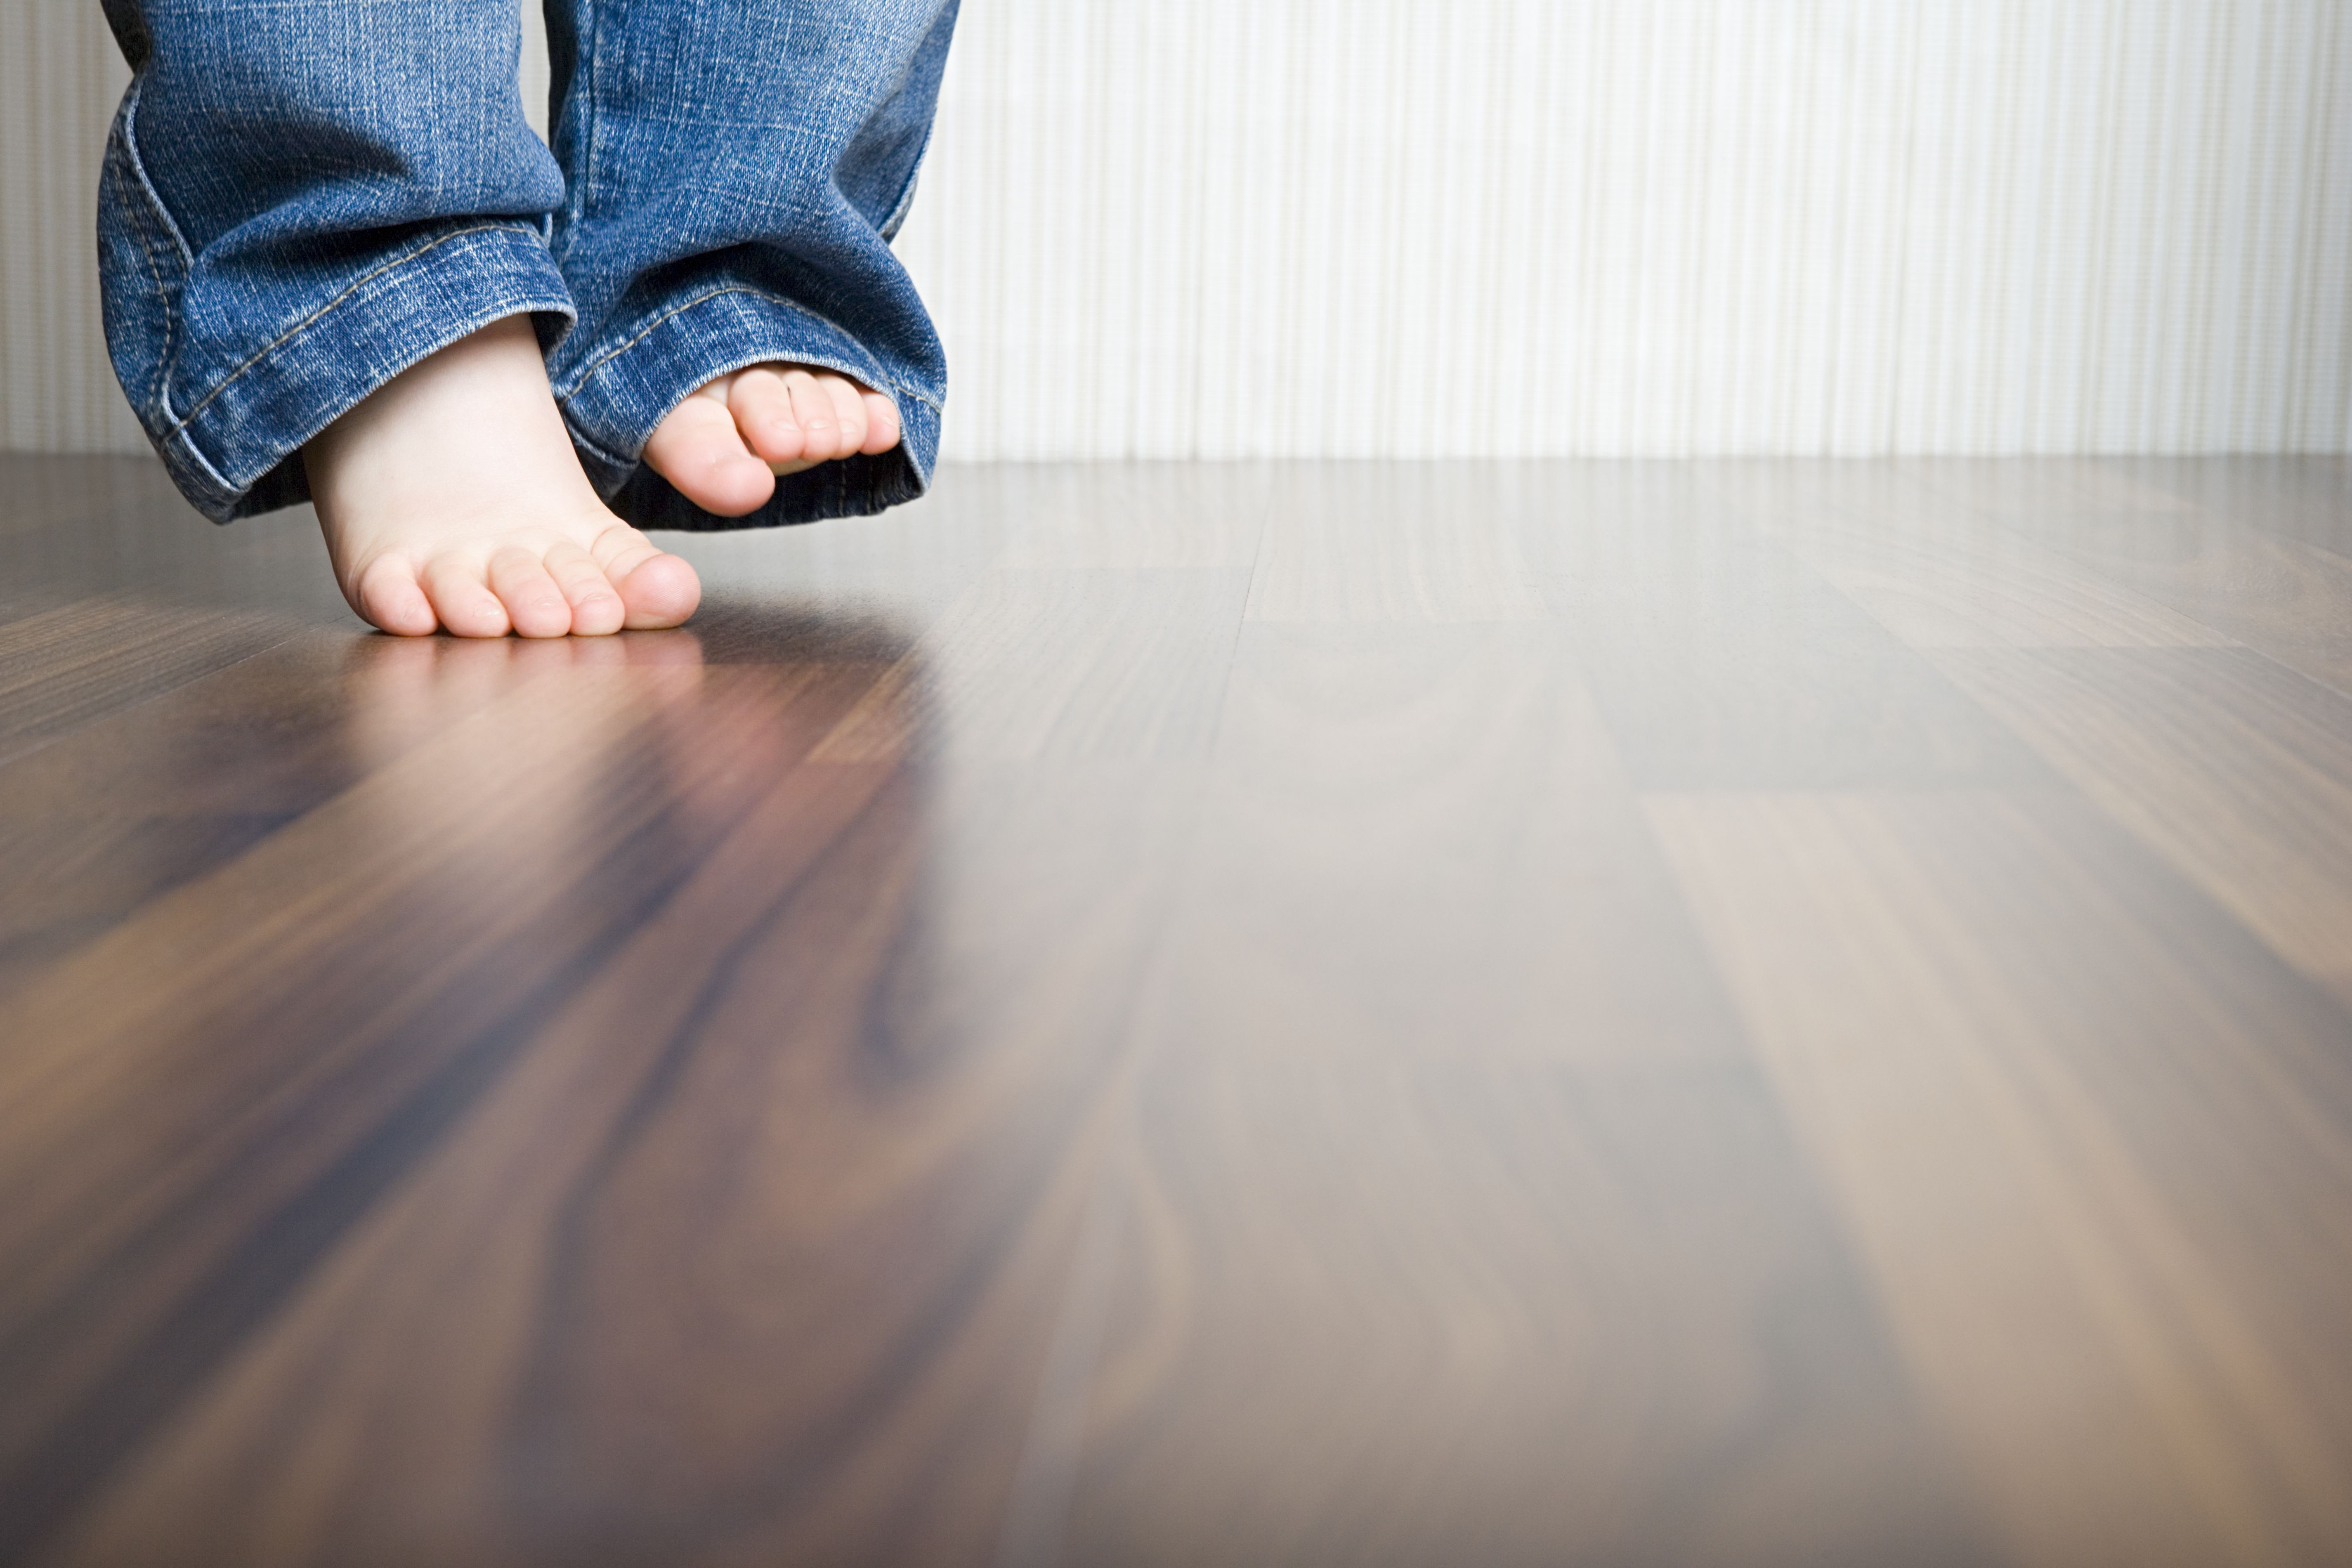 hardwood floor buffer cleaner of how to clean hardwood floors best way to clean wood flooring pertaining to 1512149908 gettyimages 75403973